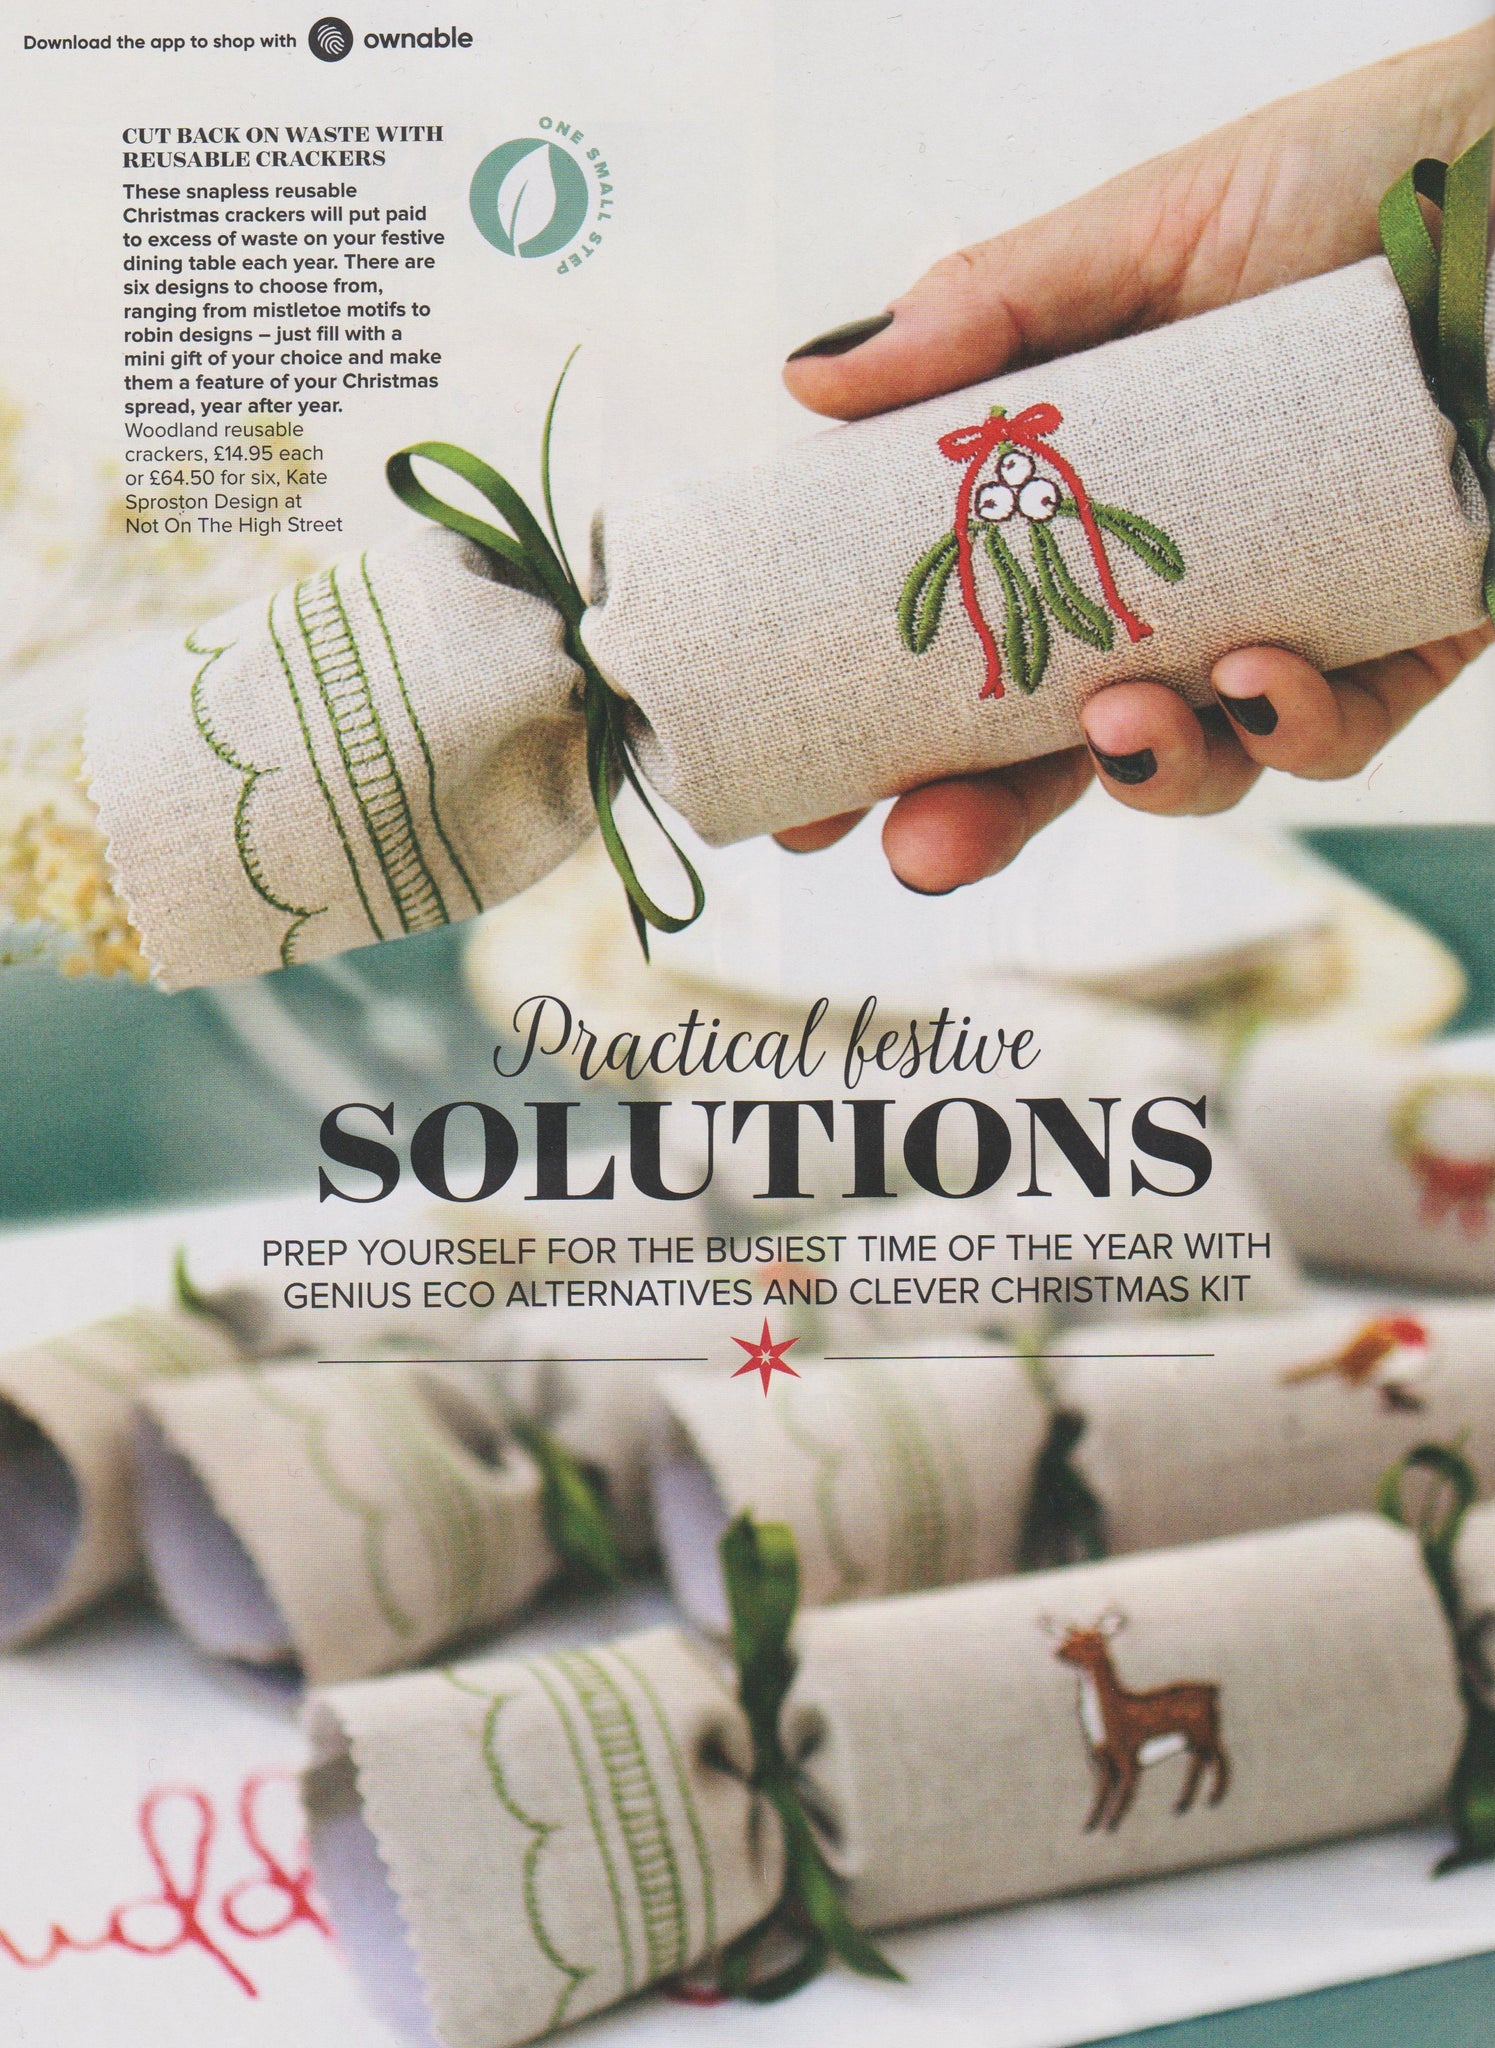 Woodland reusable Christmas crackers by Kate Sproston Design as featured in Ideal Homes Complete Guide to Christmas 2020